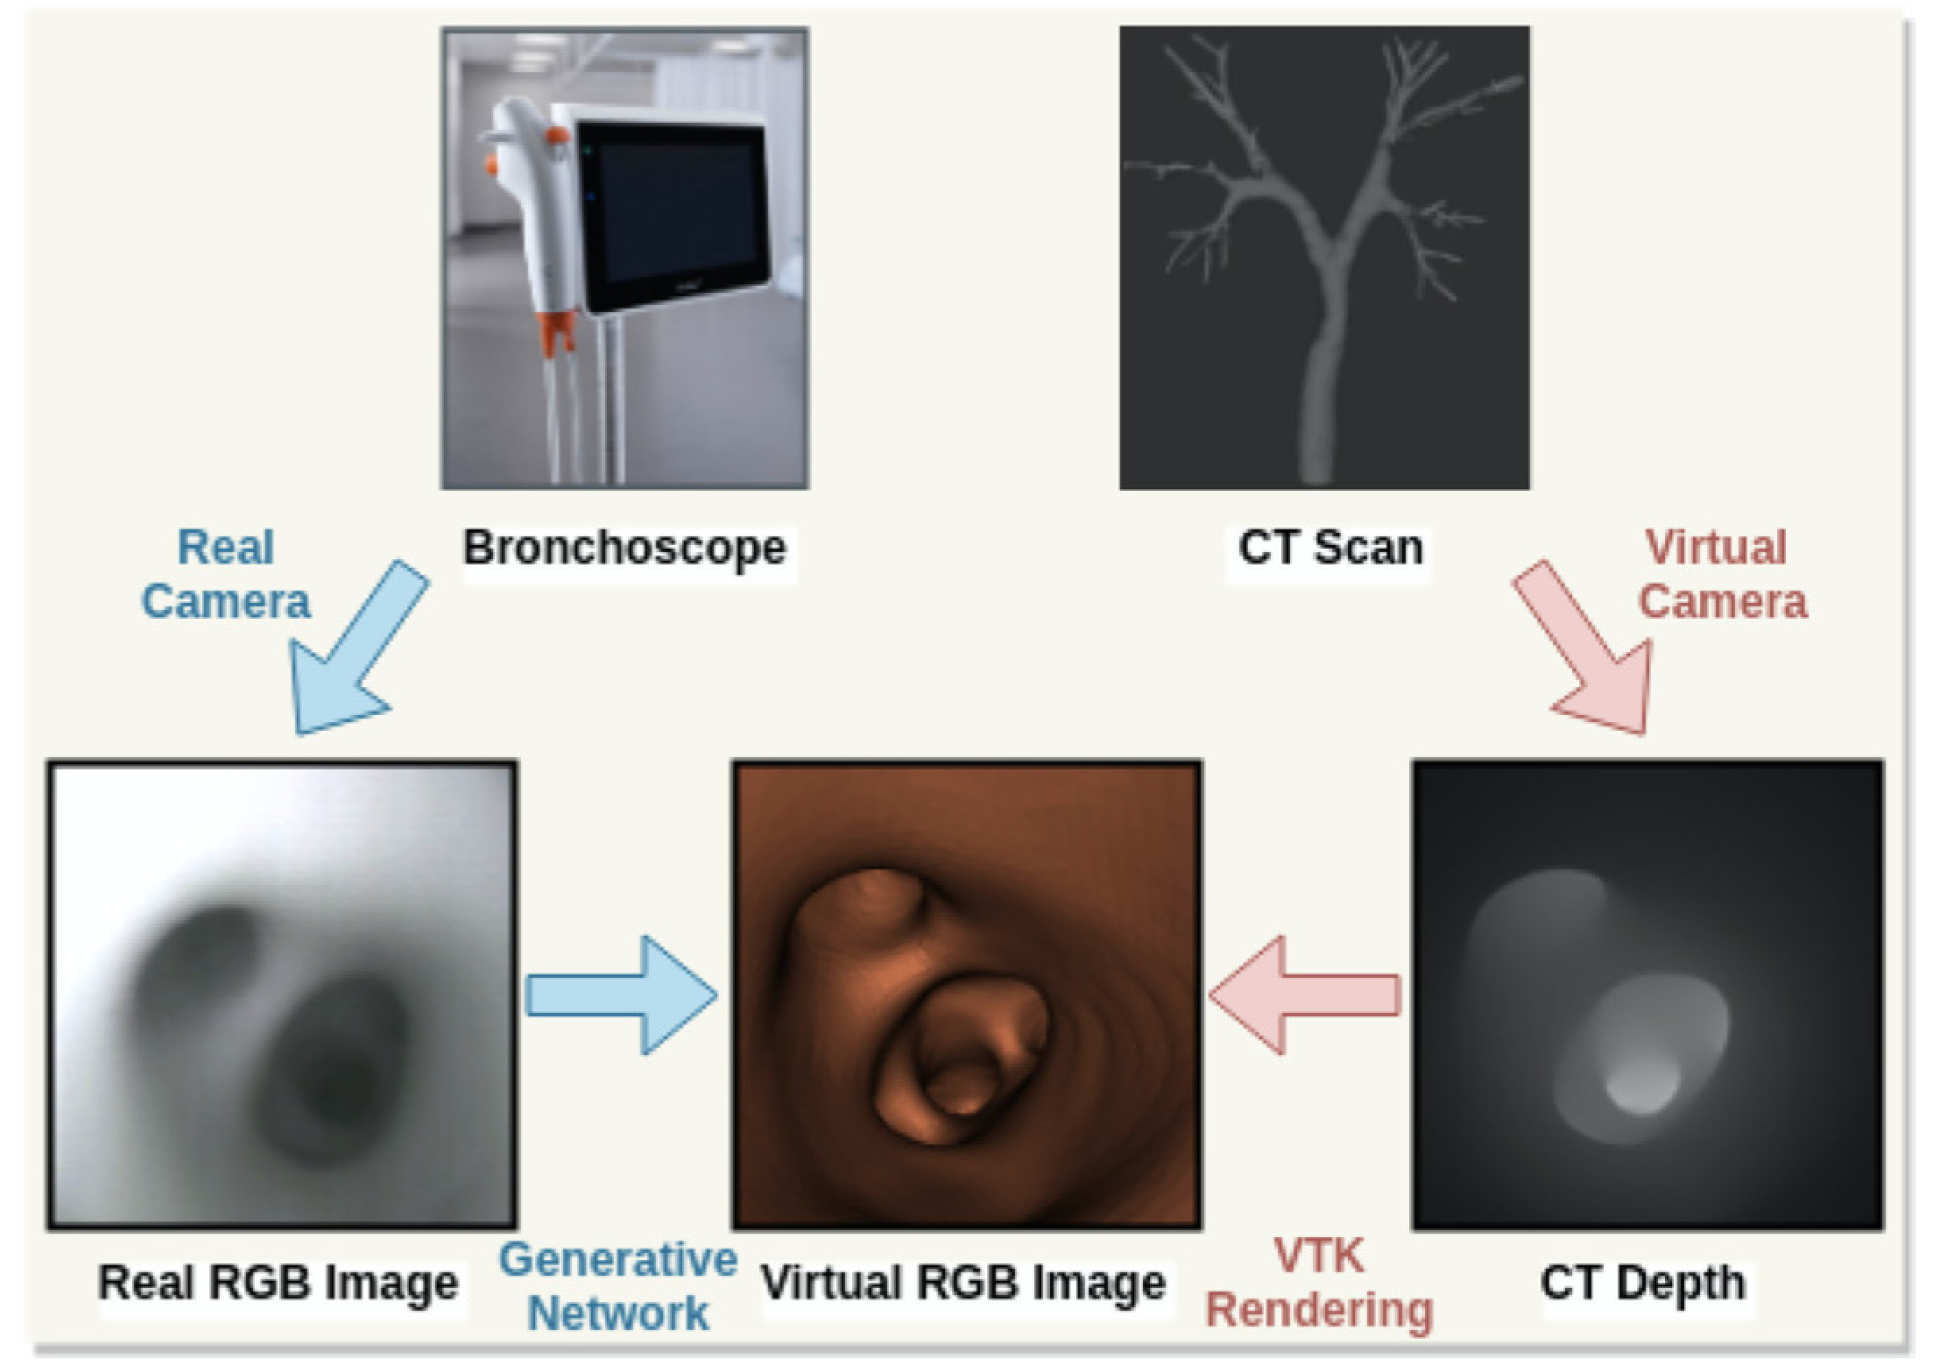 The pipeline of proposed domain transfer between the real RGB image and the CT depth.